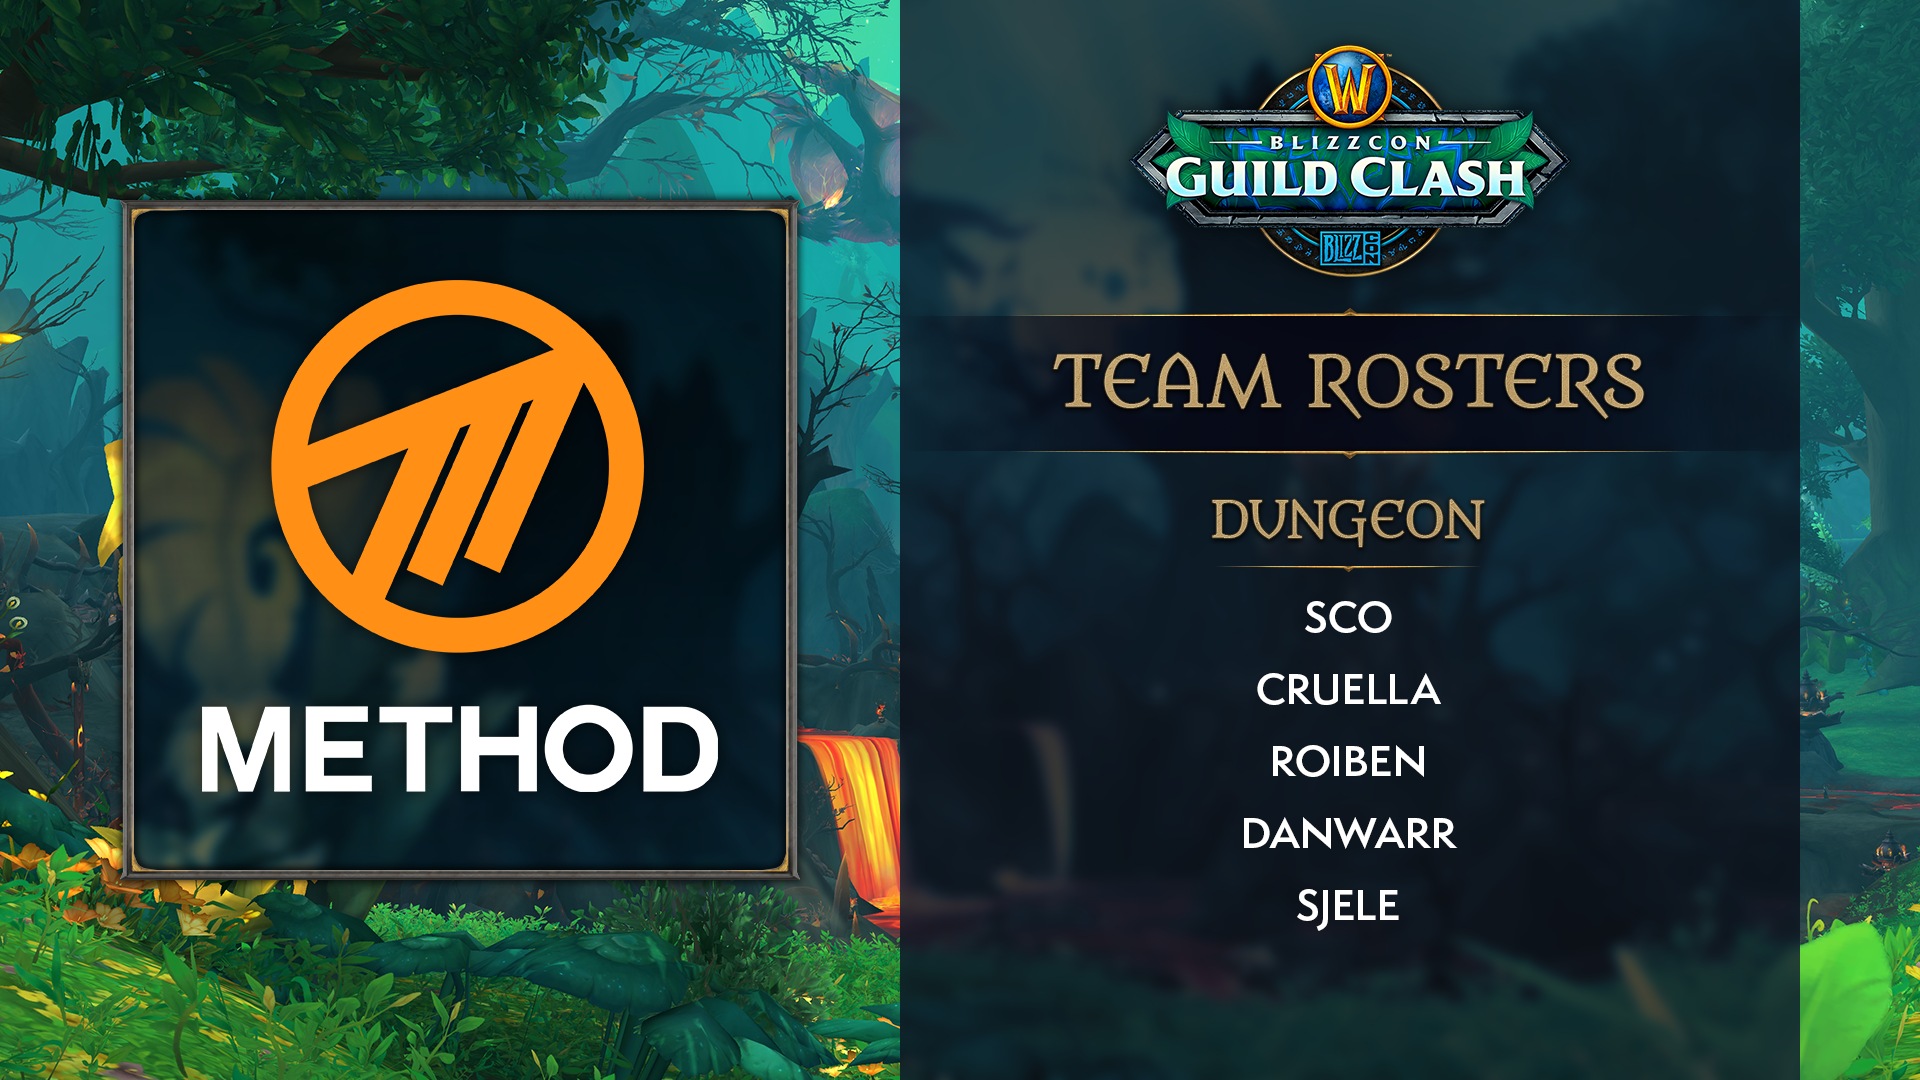 WoW_Esports_Blizzcon_GuildClash_TeamRoster_method_dungeon.png